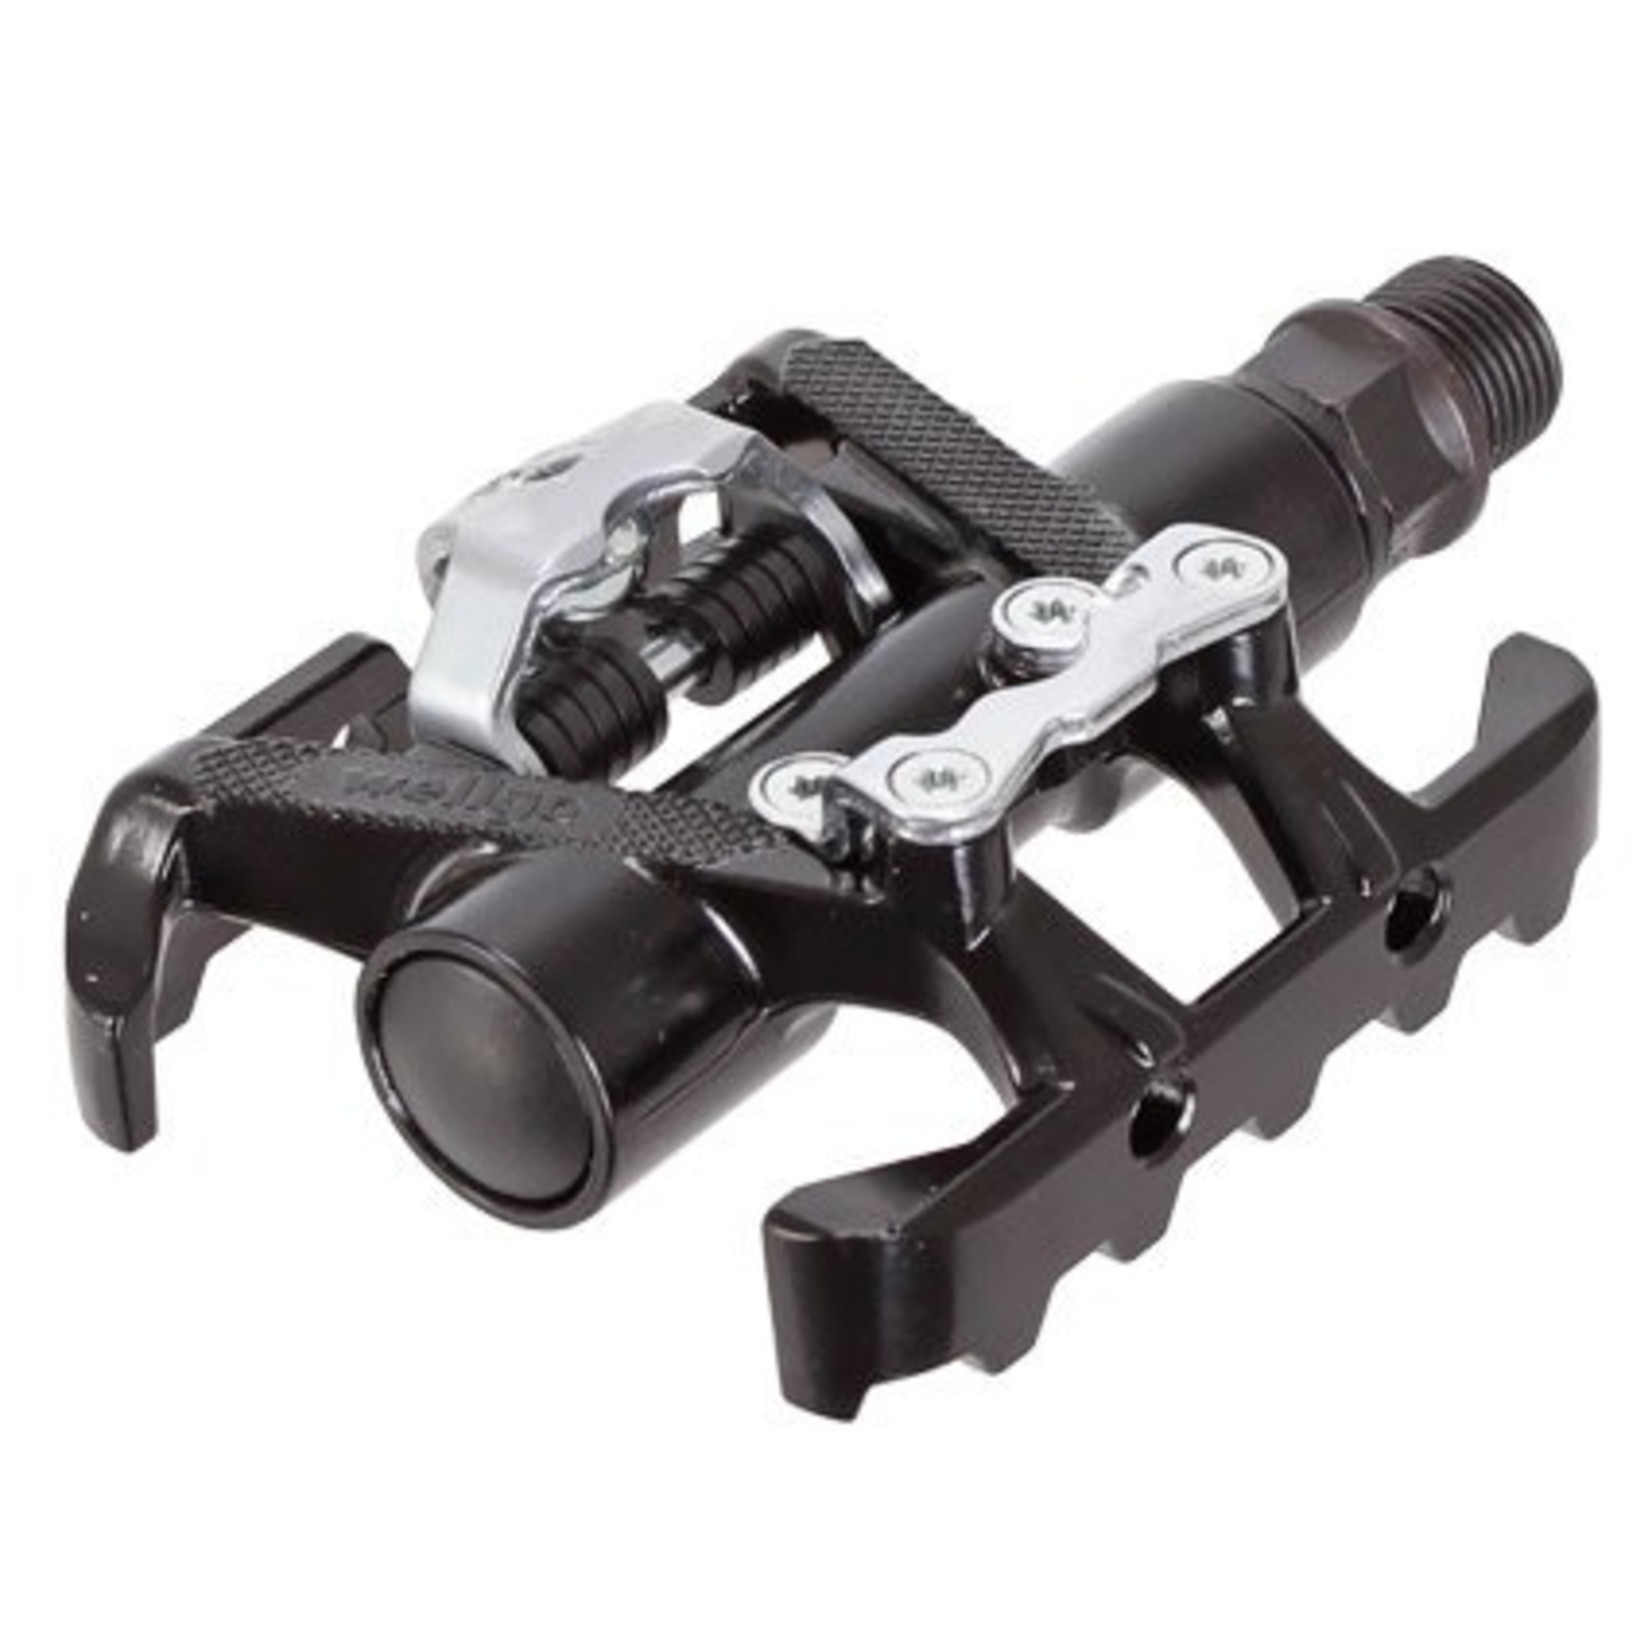 Wellgo C099 clipless/cage pedals, black